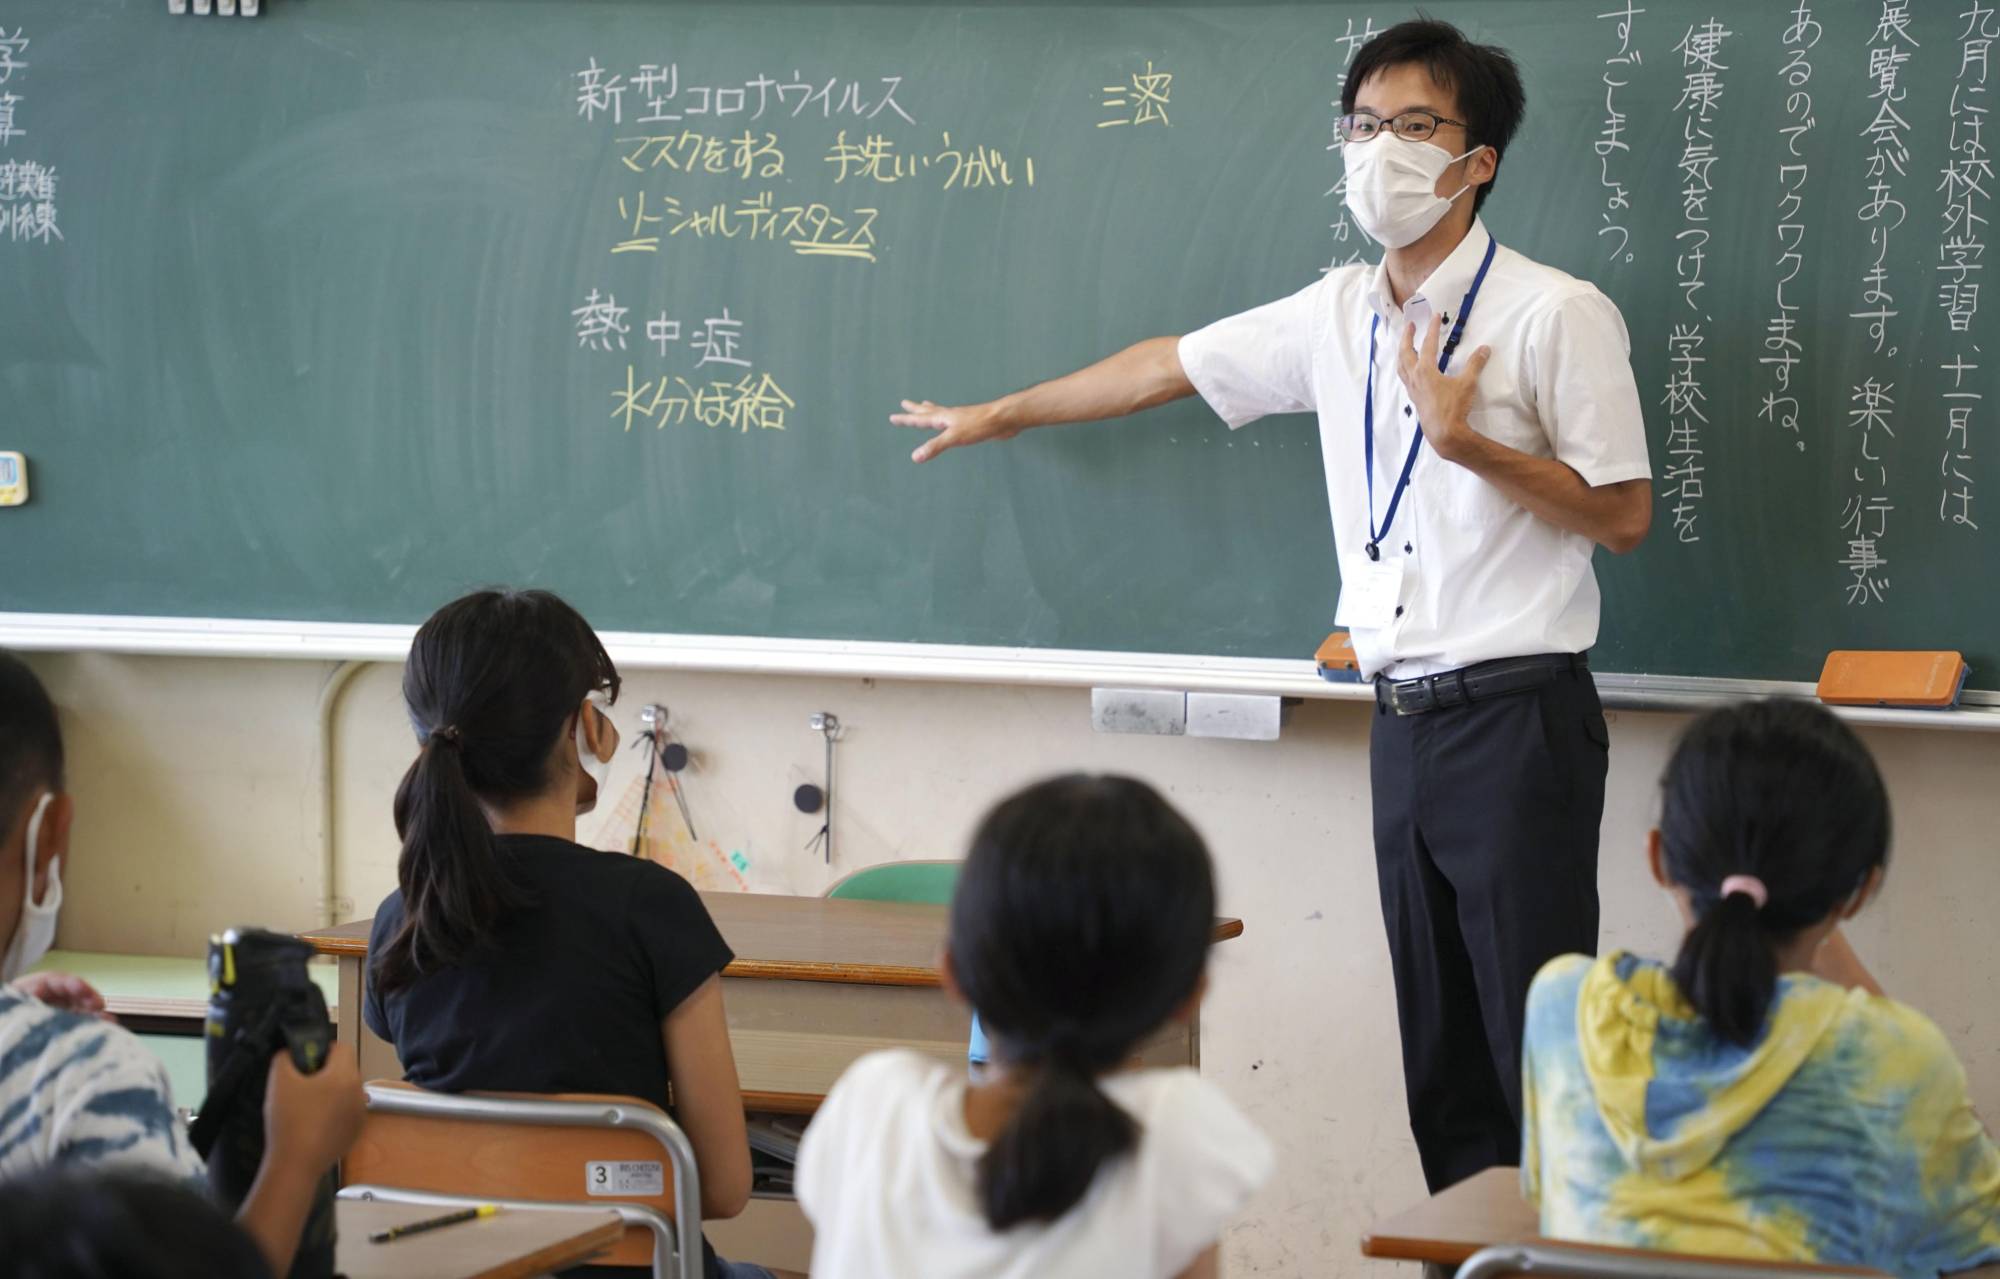 More than 70 percent of schoolchildren in Japan feel stress due to the novel coronavirus, according to a survey by the National Center for Child Health and Development.  | KYODO 